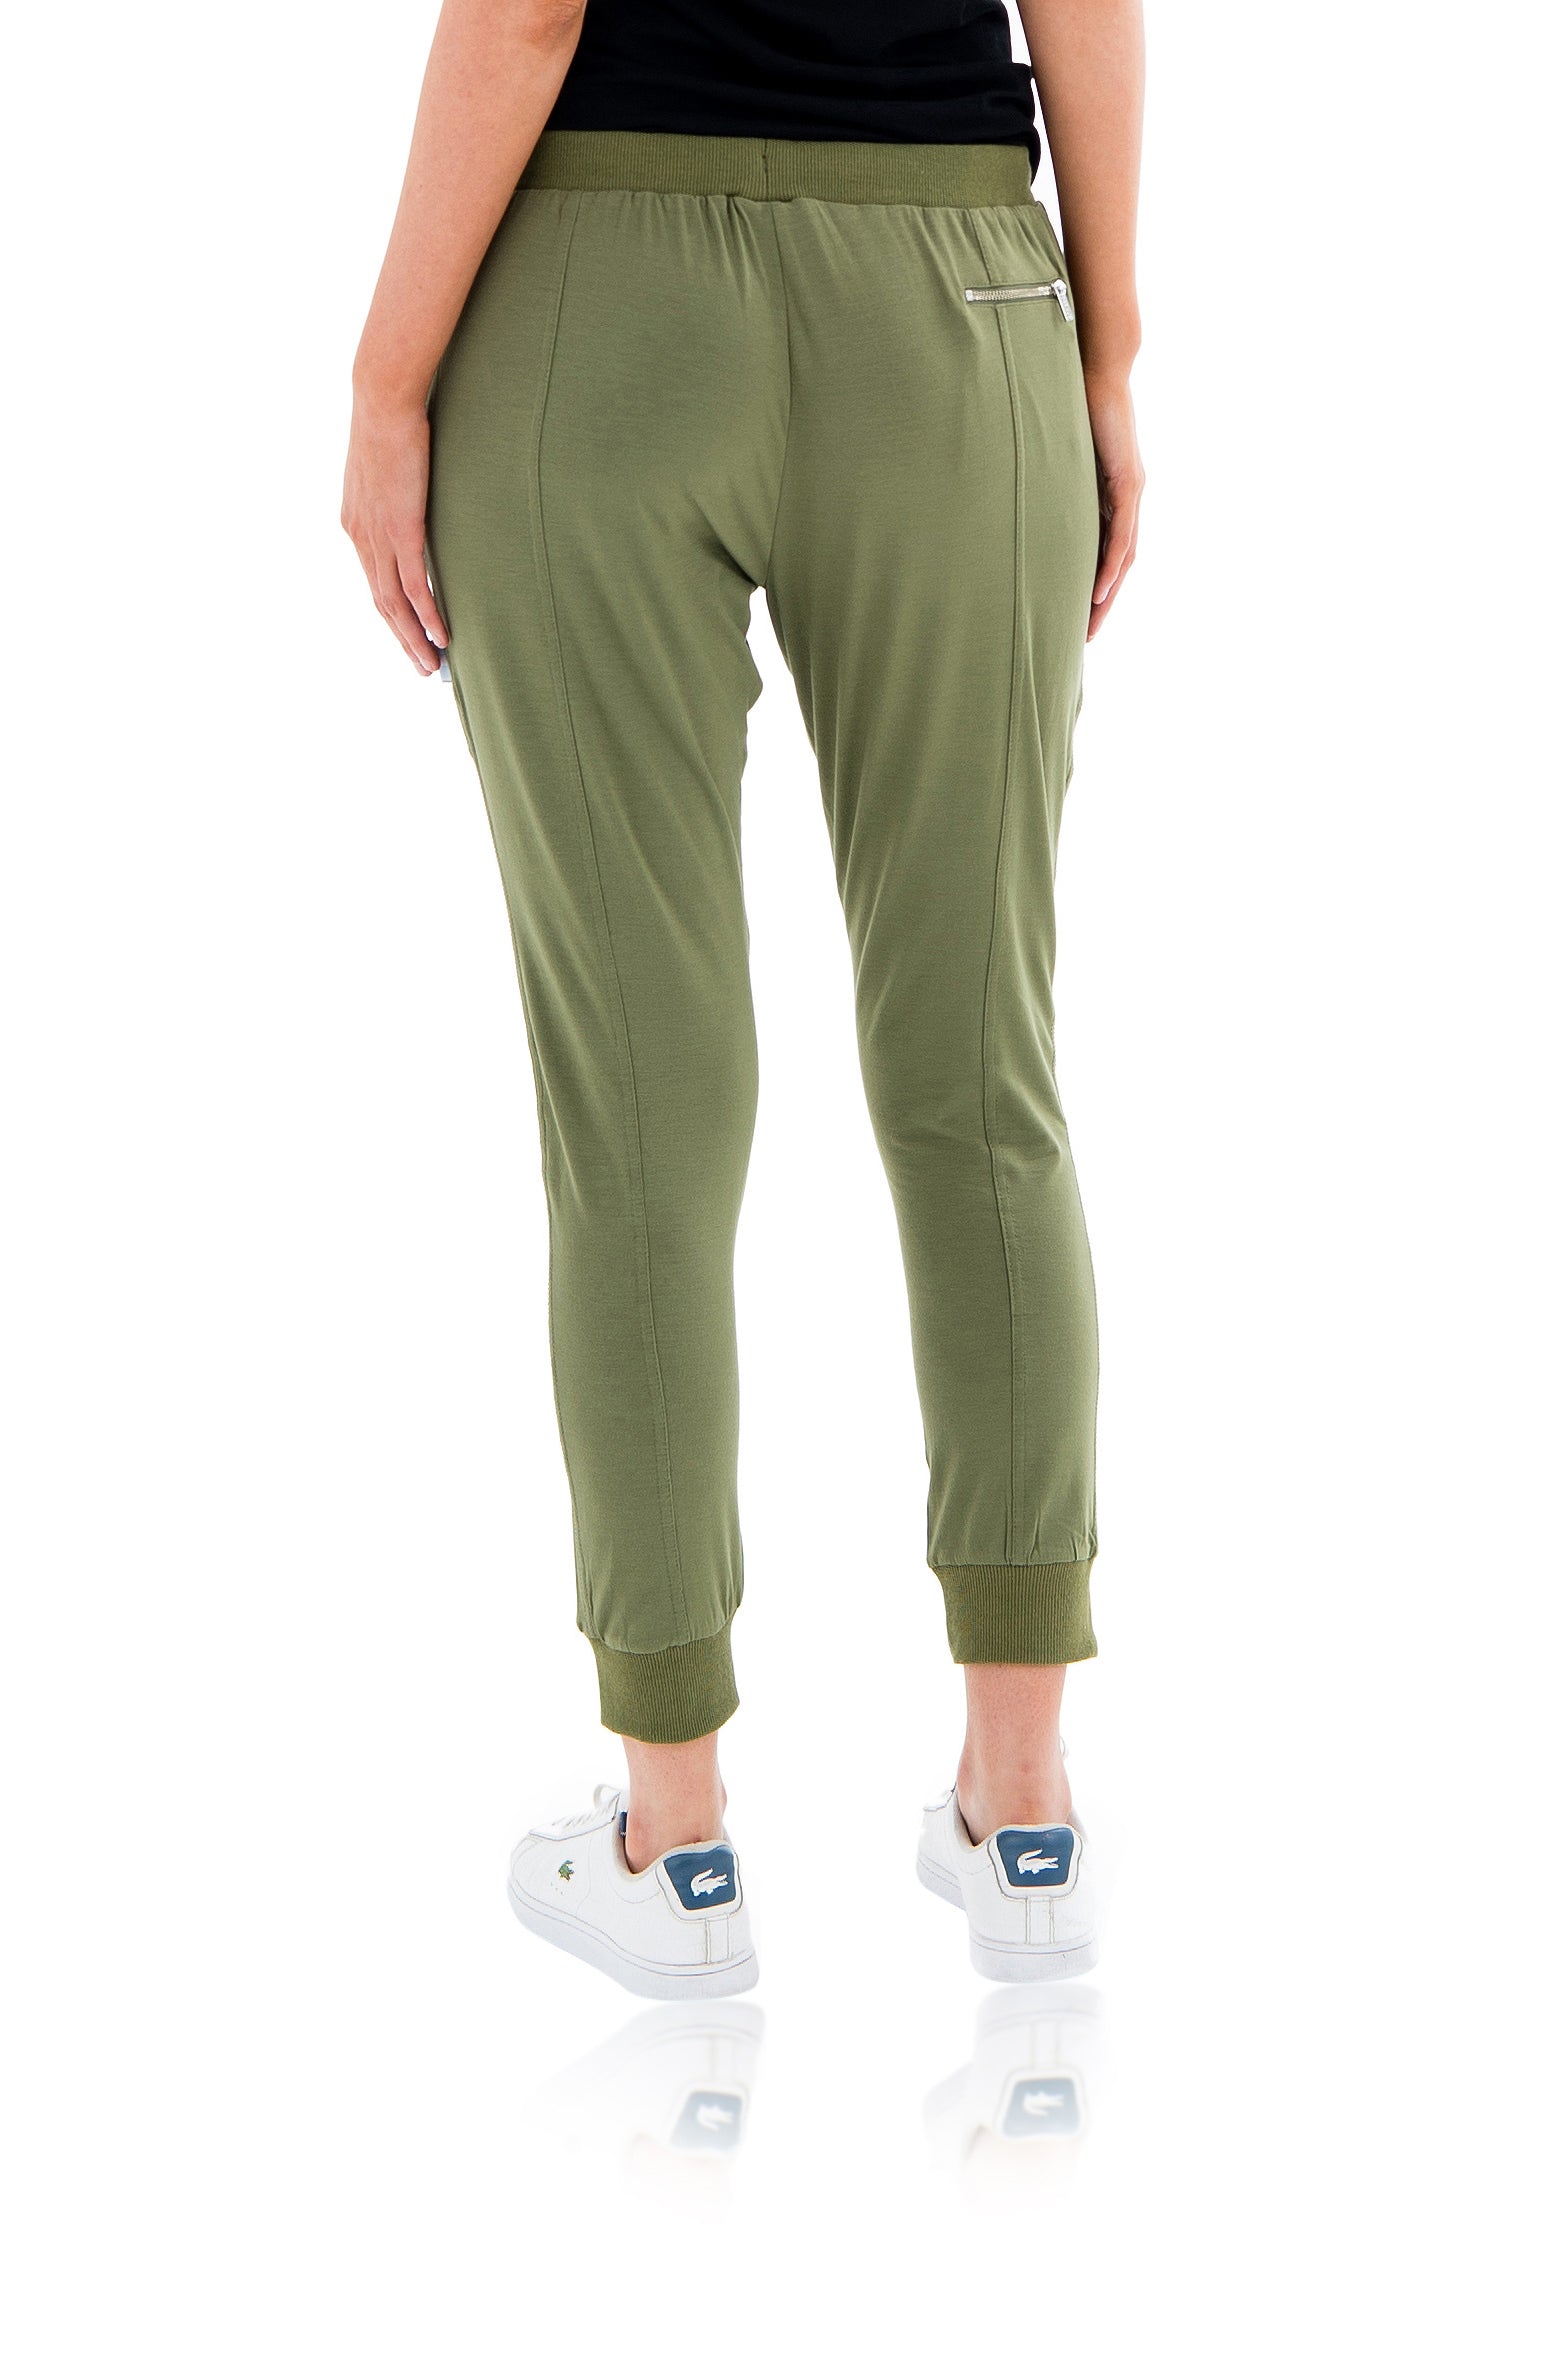 LILLY LOUNGE CAPRI PANT - ARMY GREEN